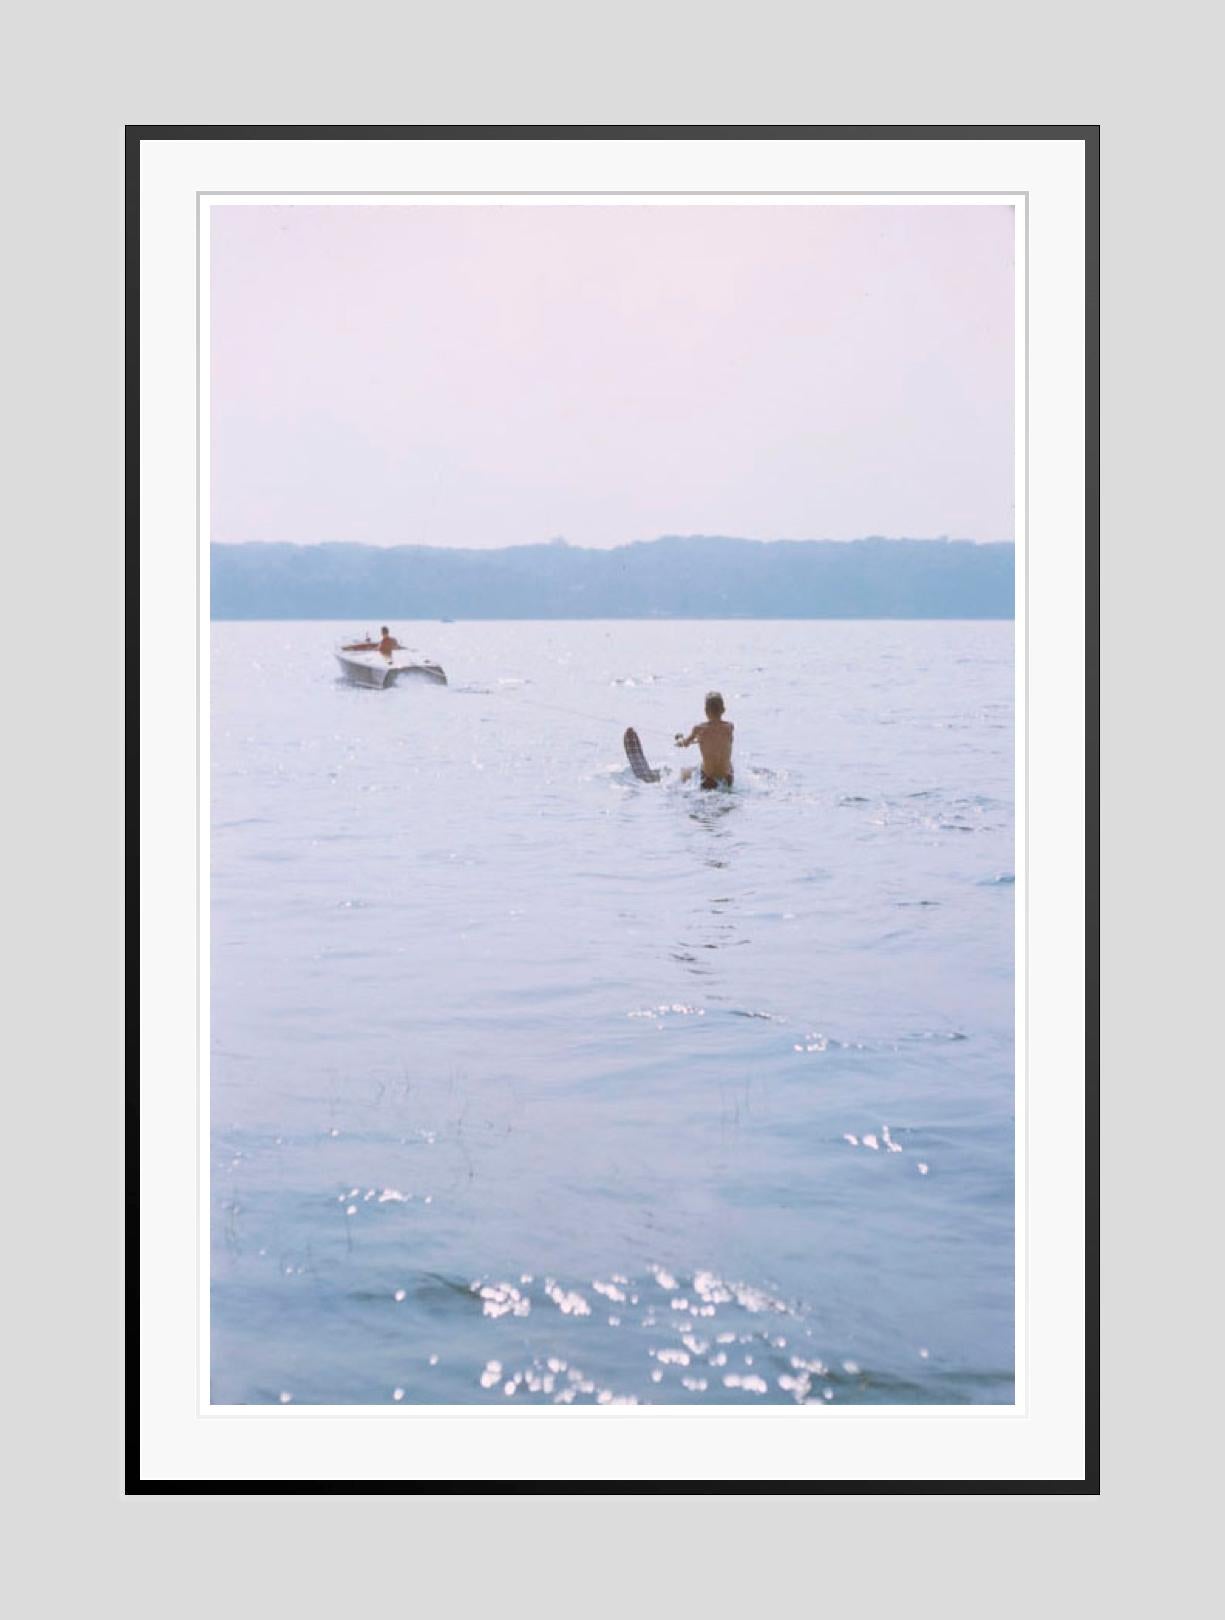 Water Skiing 
1956

A waterskier begins a deep-water start, 1956

by Toni Frissell

48 x 72 “ / 121 x 182 cm - paper size
Archival pigment print
unframed 
(framing available see examples - please enquire) 

Limited Signature Stamped Edition